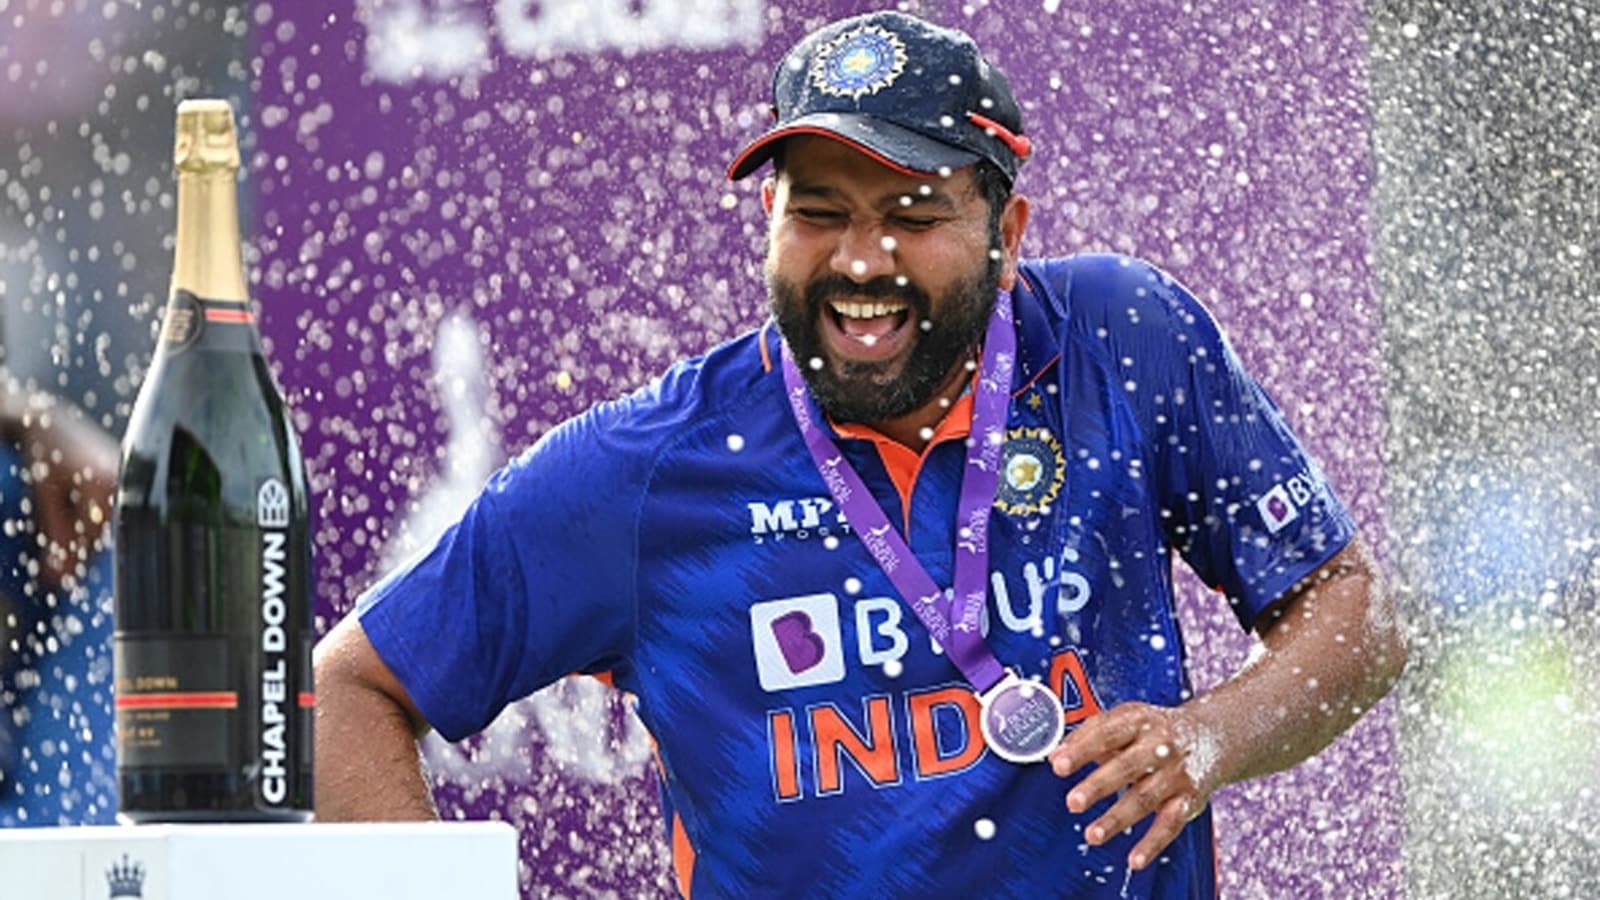 watch-kohli-s-priceless-reaction-to-pant-dhawan-showering-rohit-sharma-with-champagne-after-india-s-series-win